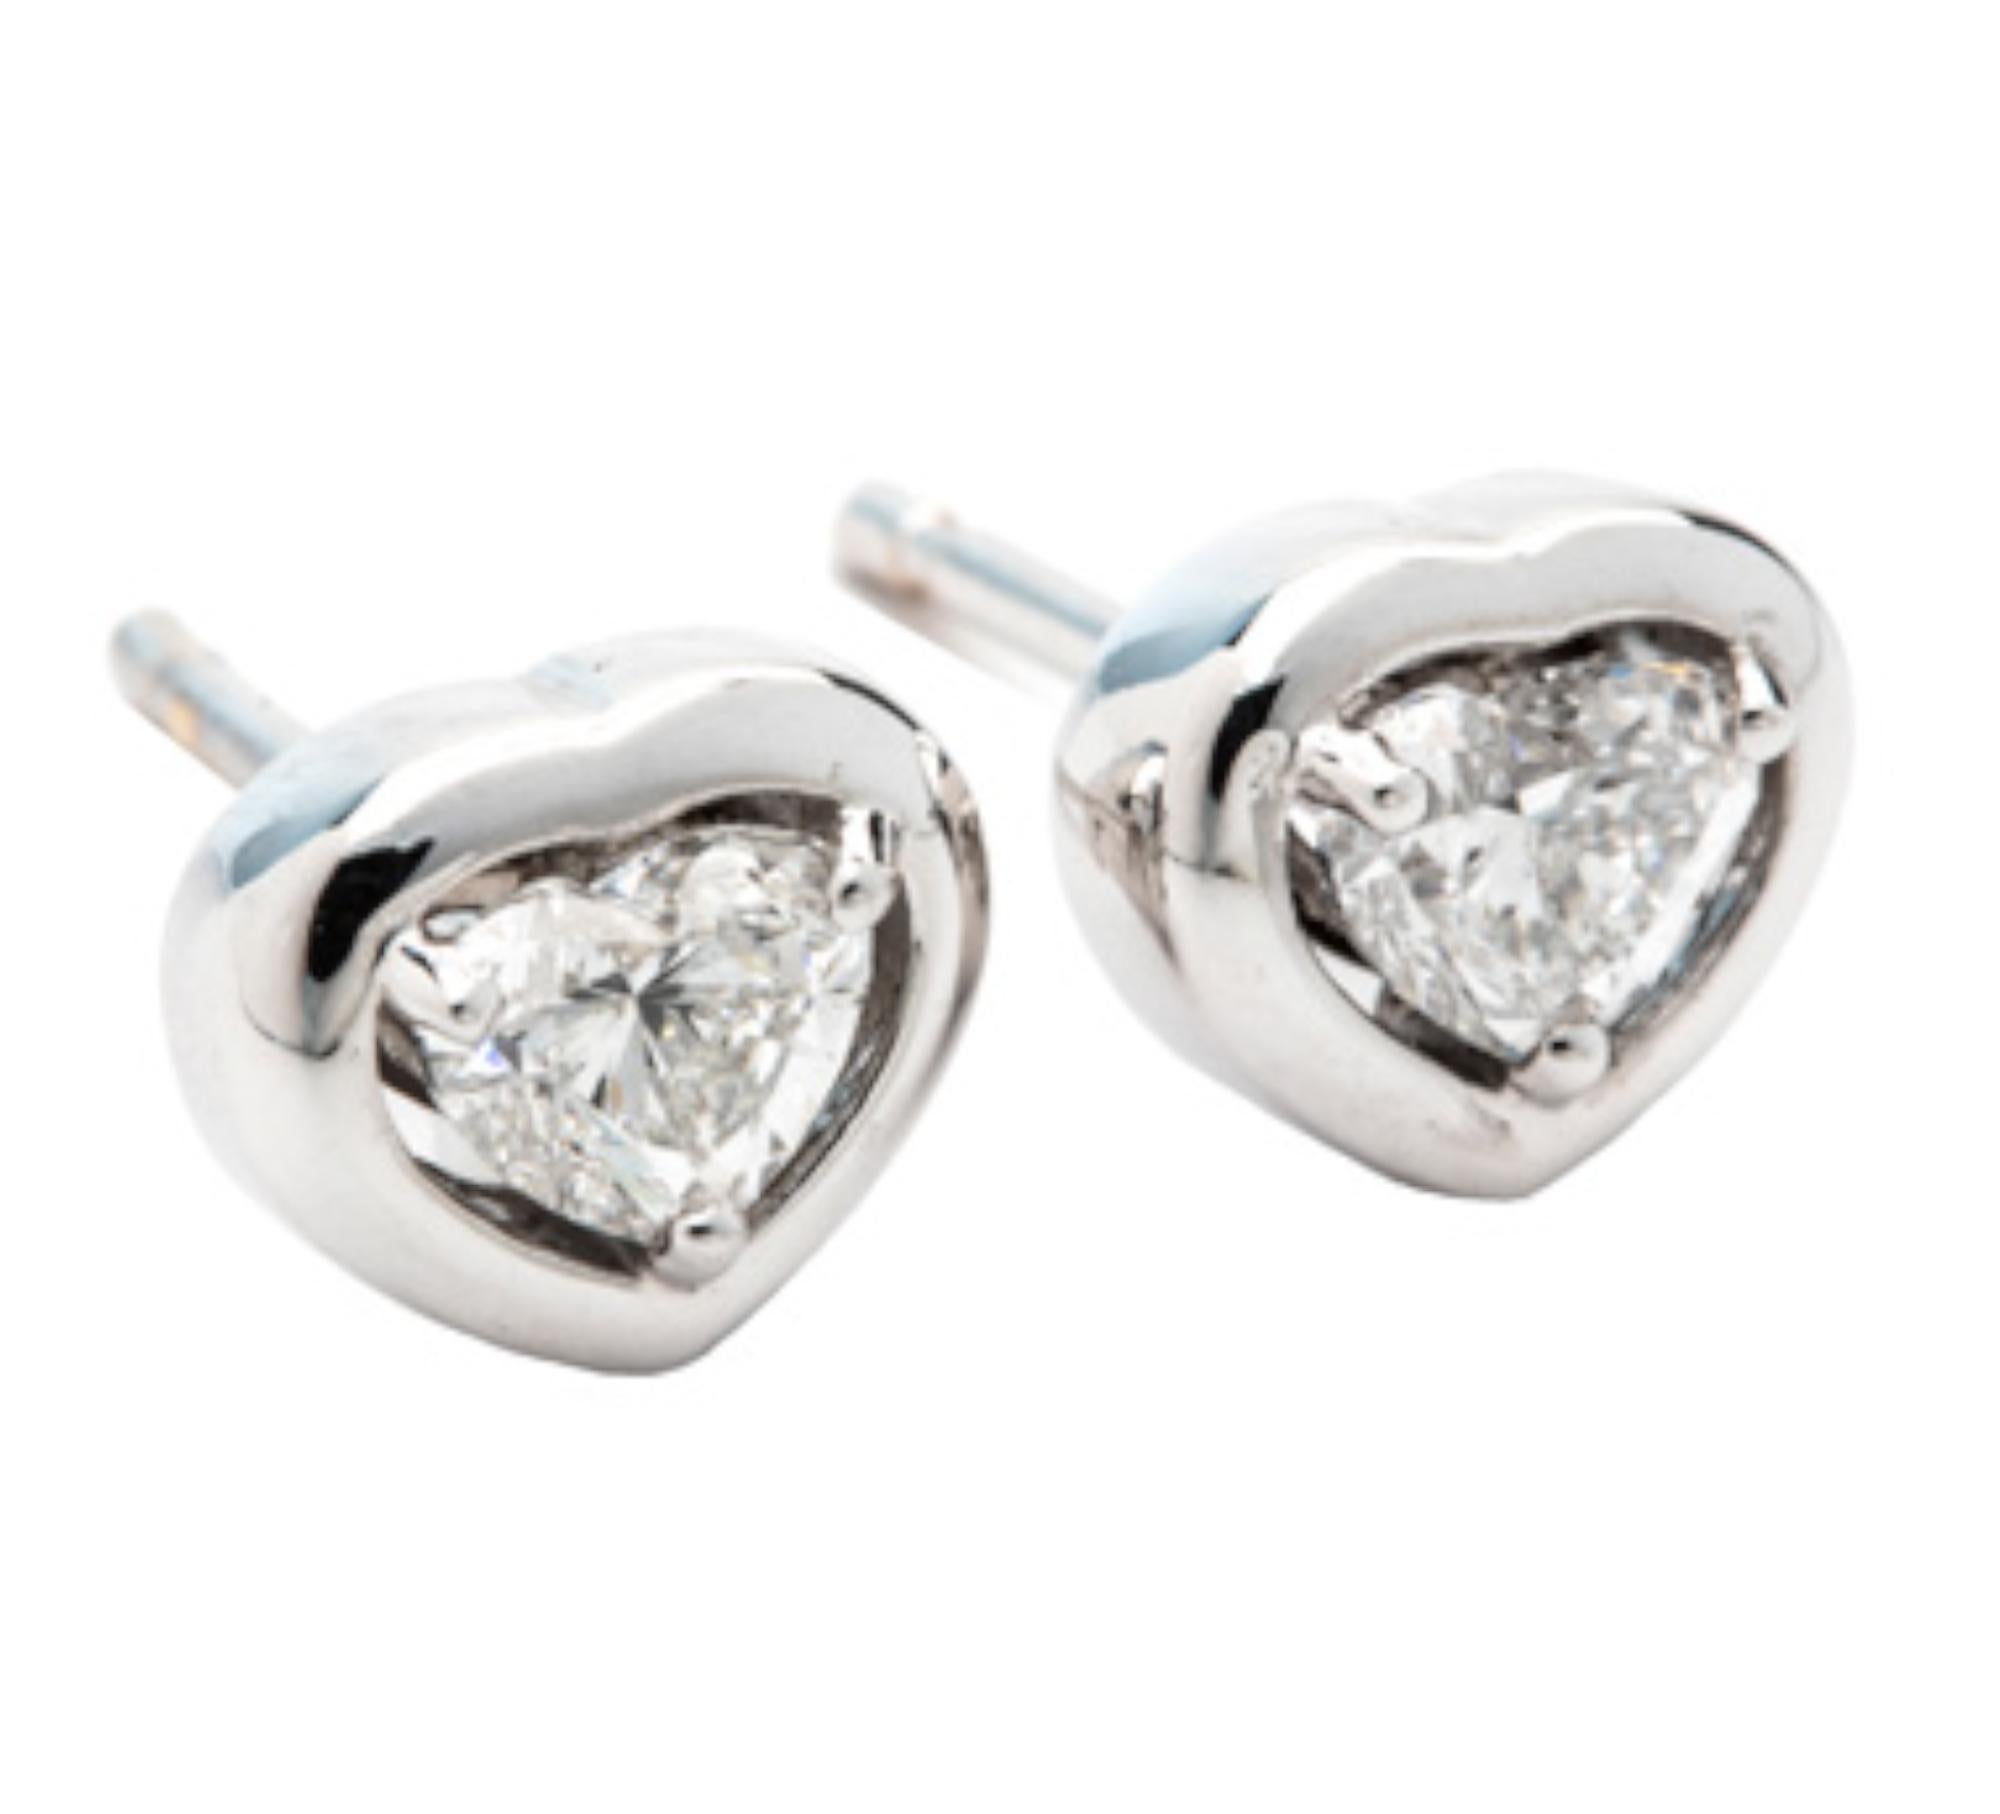 Unlock the depths of romance and elegance with our 0.60 Carat E-F Color VS Heart Cut Diamond 18K White Gold Stud Earrings. These enchanting earrings are a testament to love's enduring beauty, captured in every facet.

Crafted in the finest 18K white